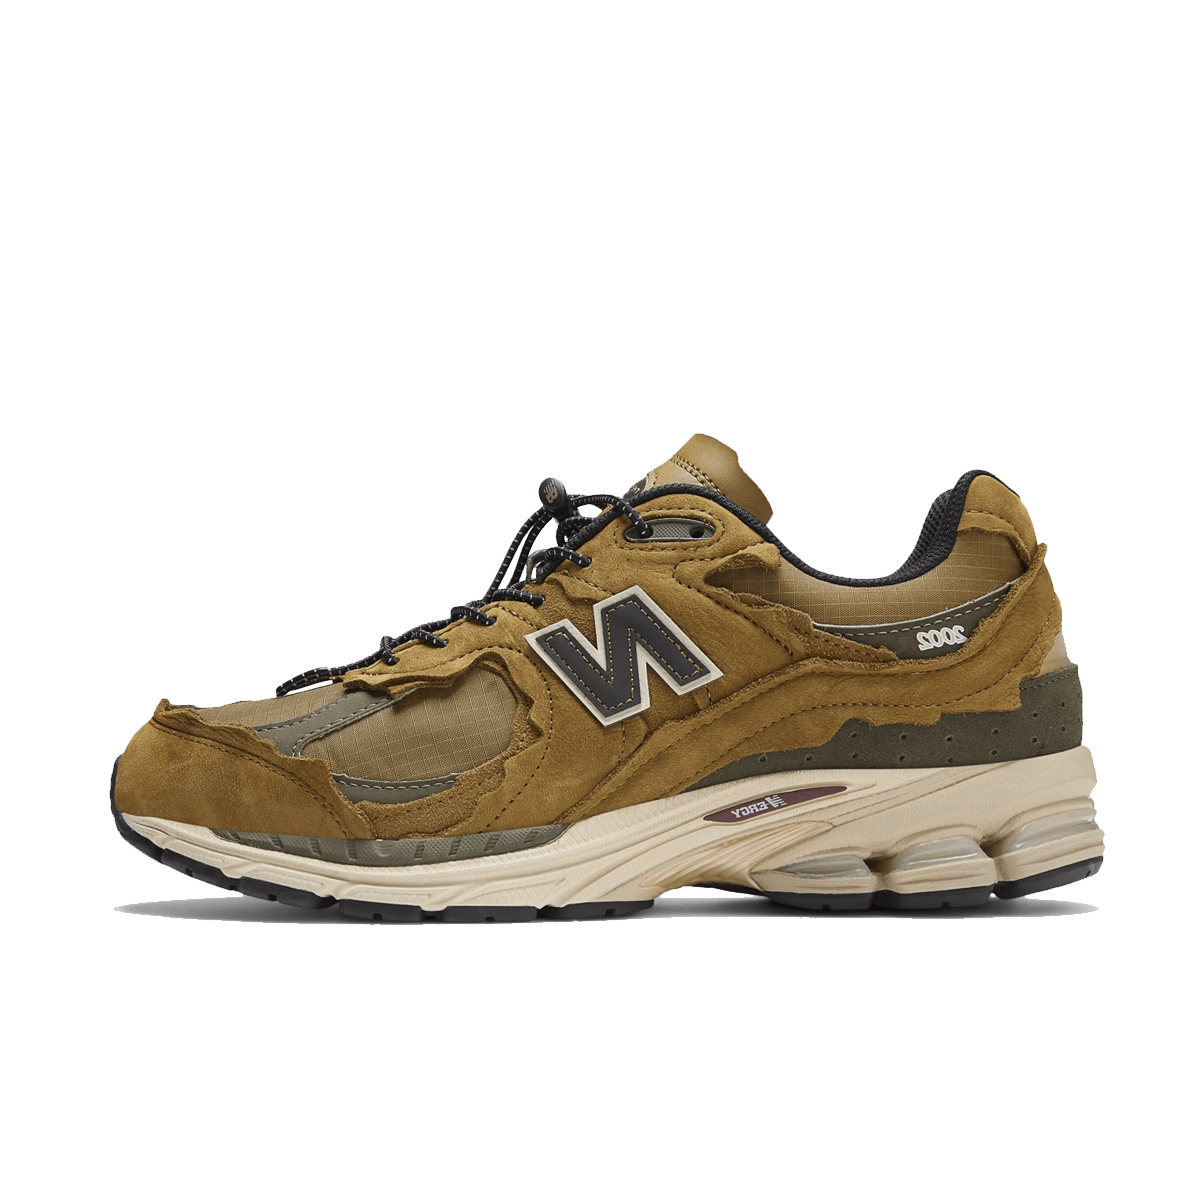 New Balance 2002R 'Brown' - Ripstop Protection Pack